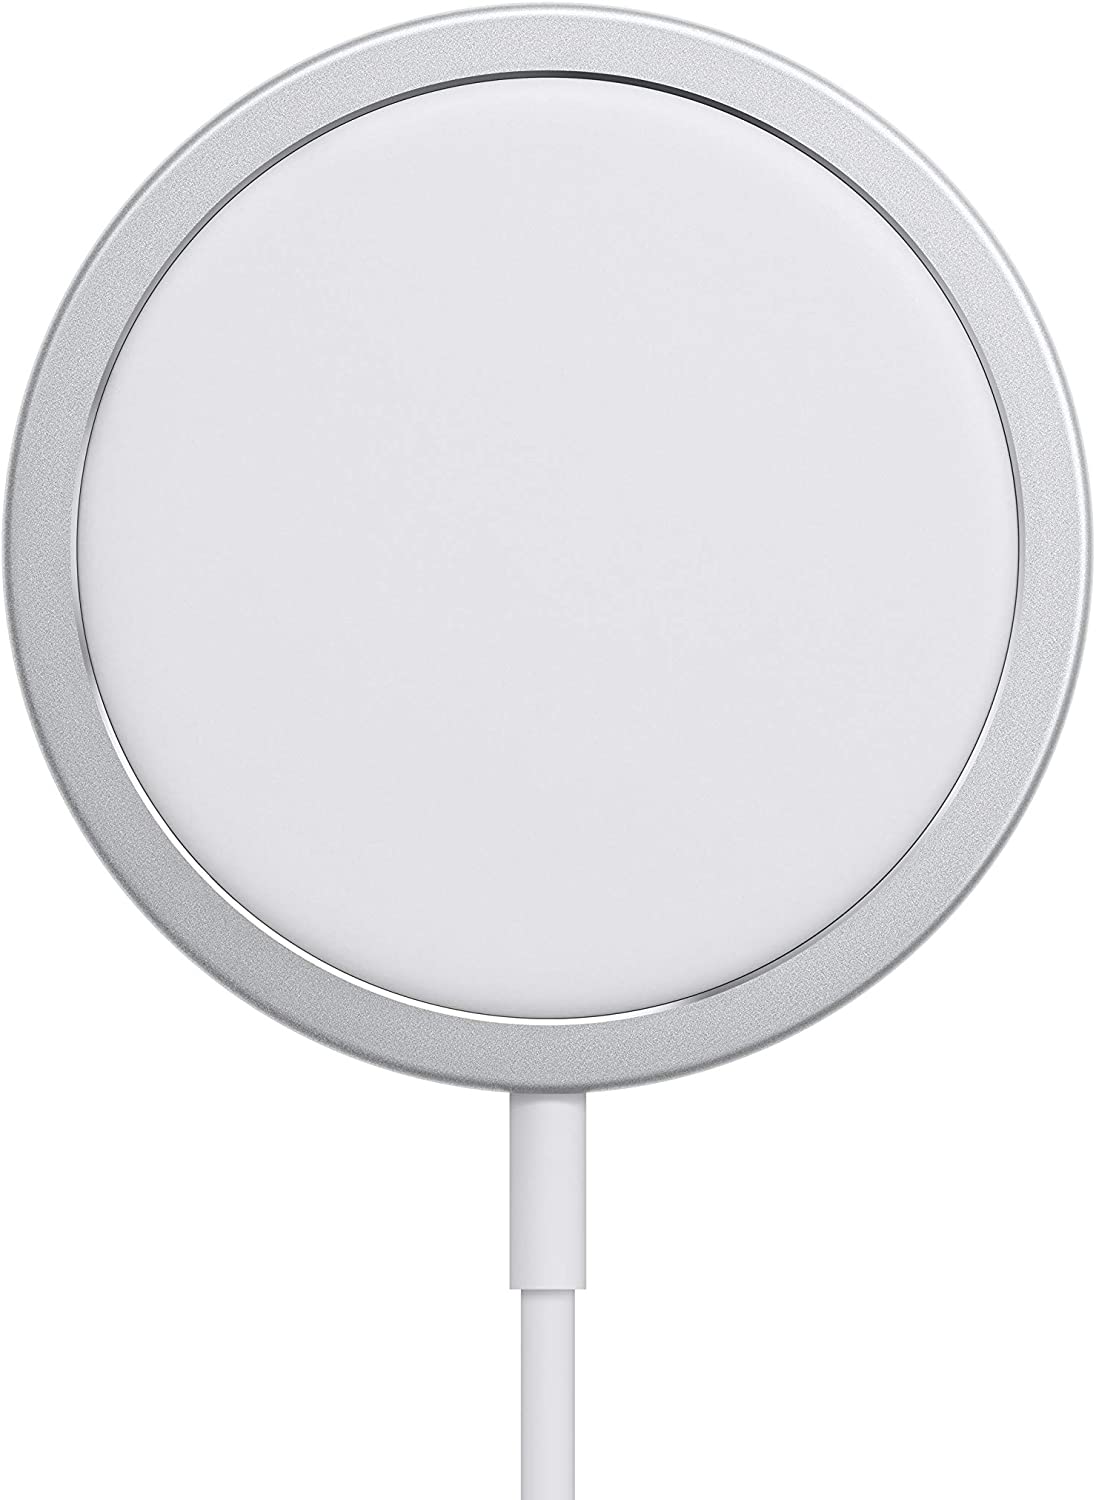 Apple MagSafe Charger - Wireless Charger with Fast Charging Capability, Type C Wall Charger, Compatible with iPhone and AirPods - White